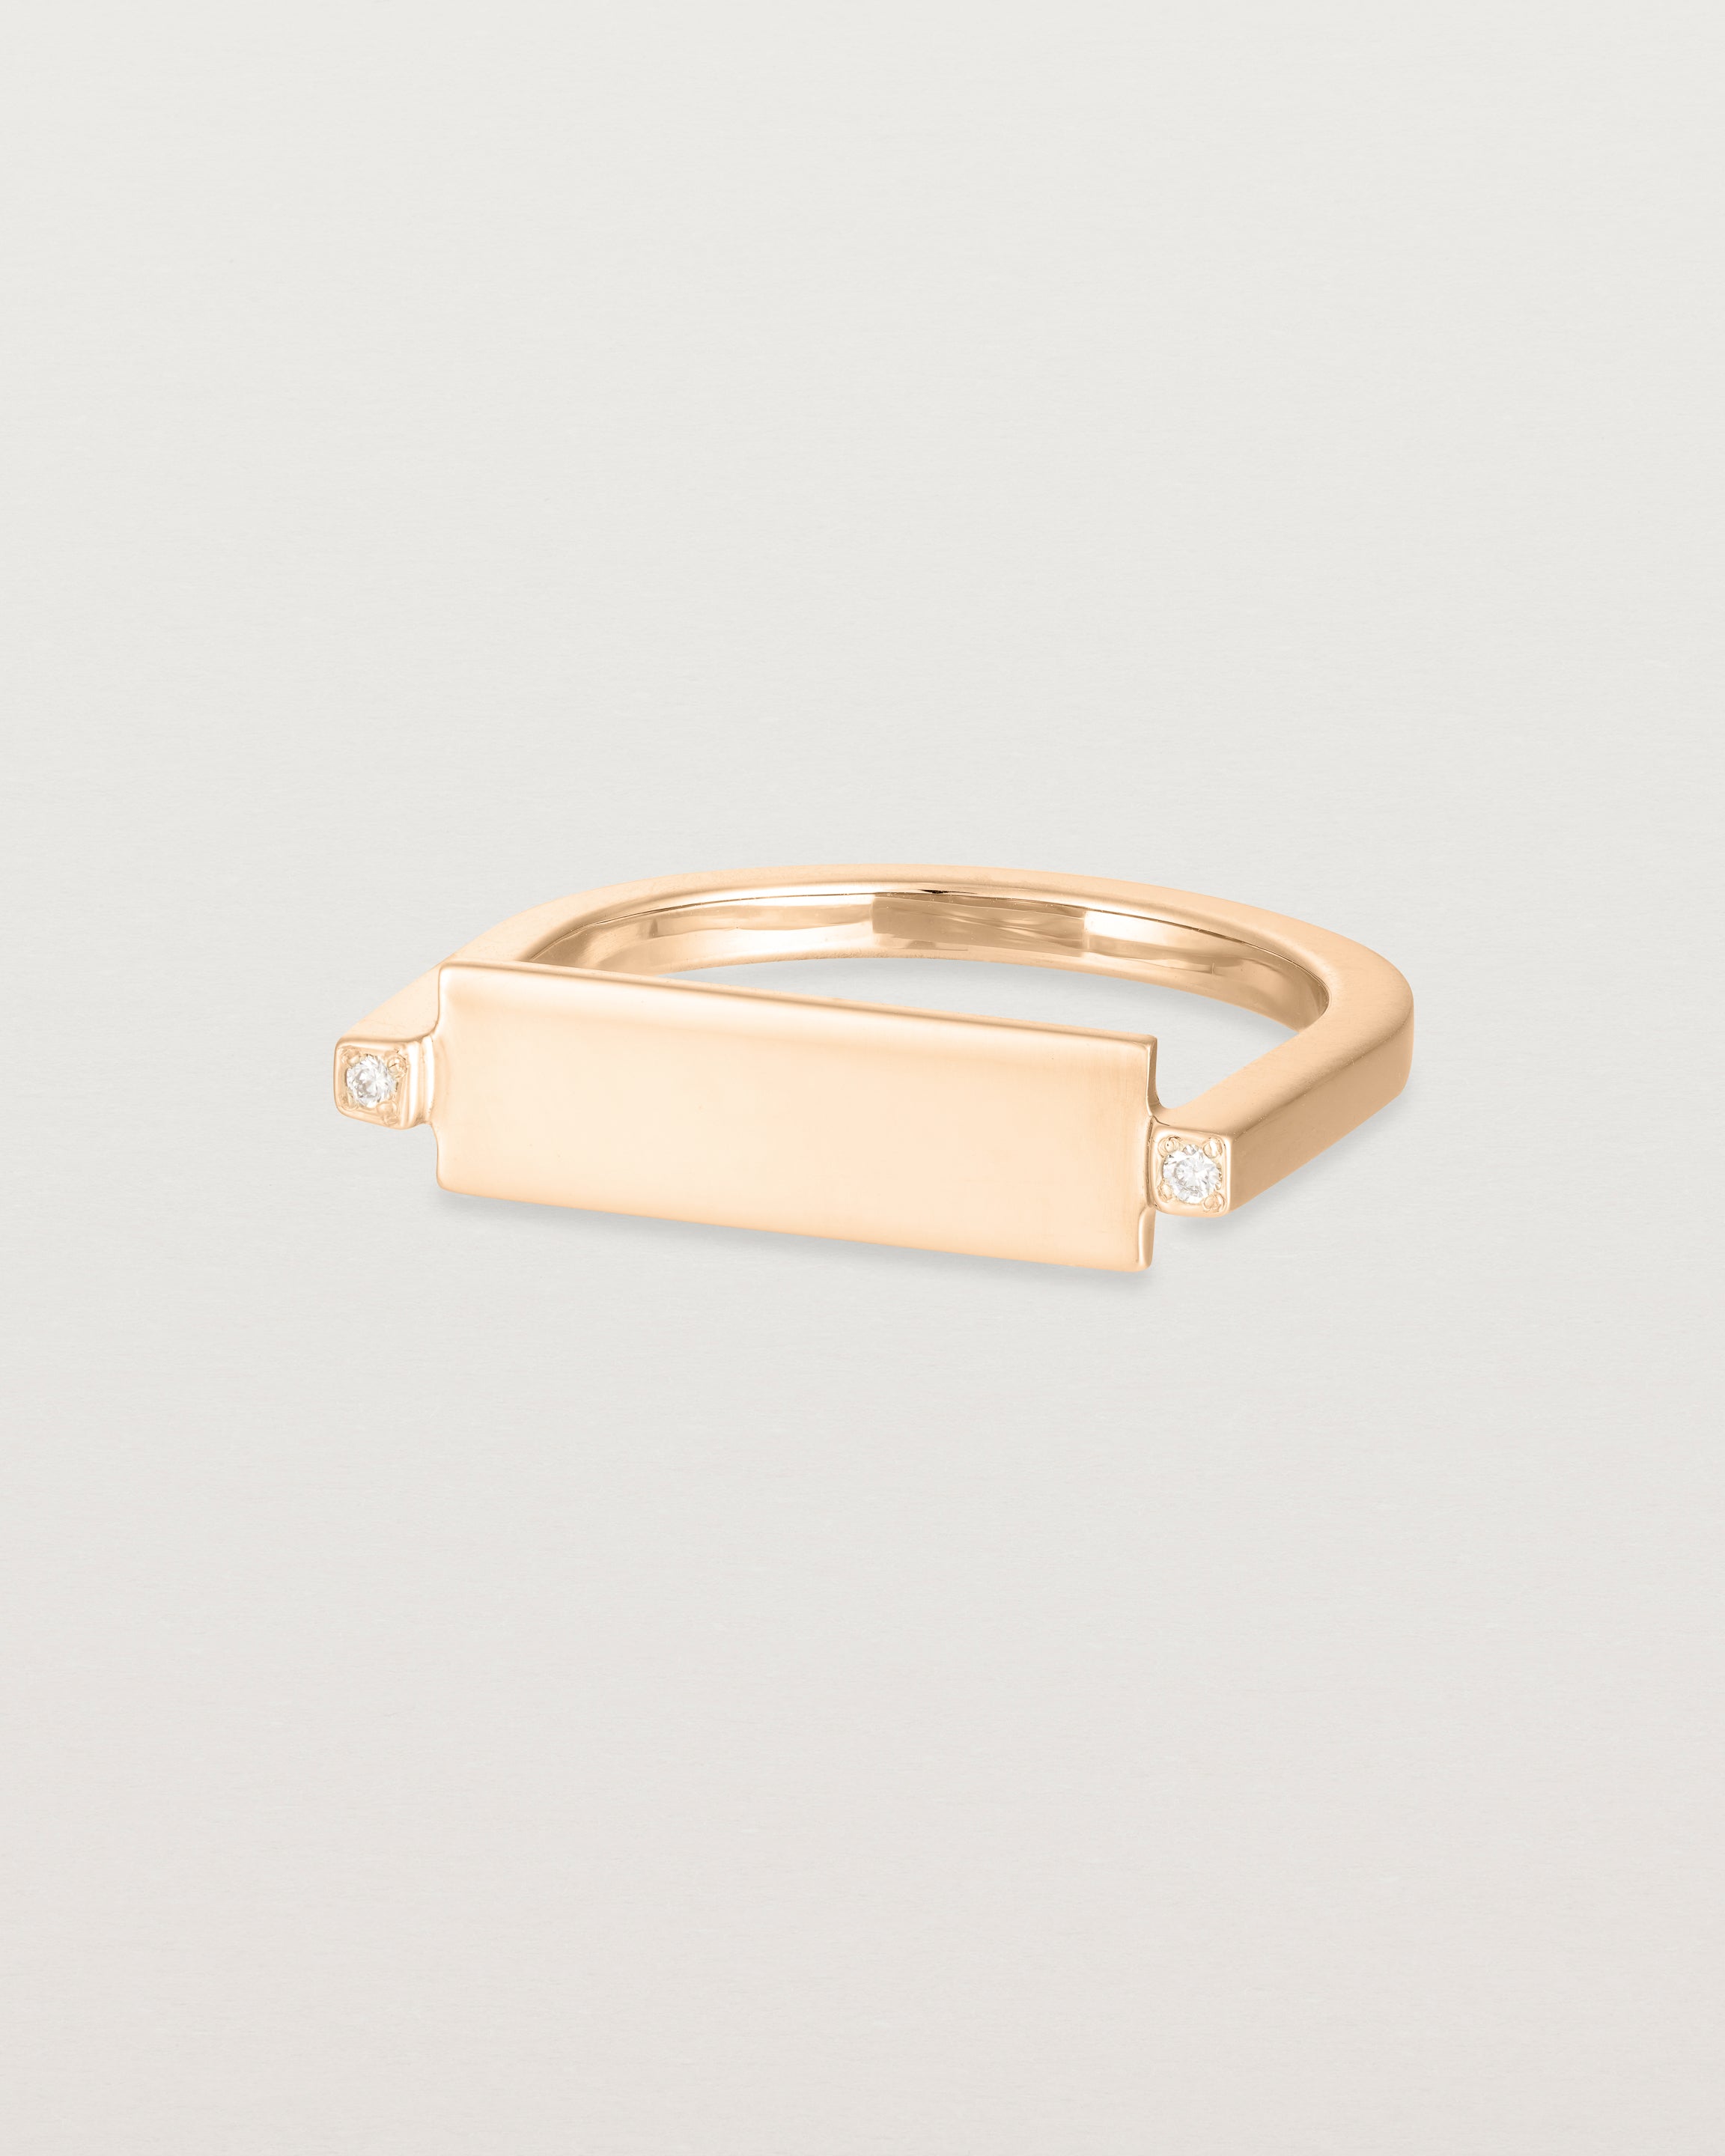 Slightly angled view of the Antares Plate Ring | Diamonds | Rose Gold.